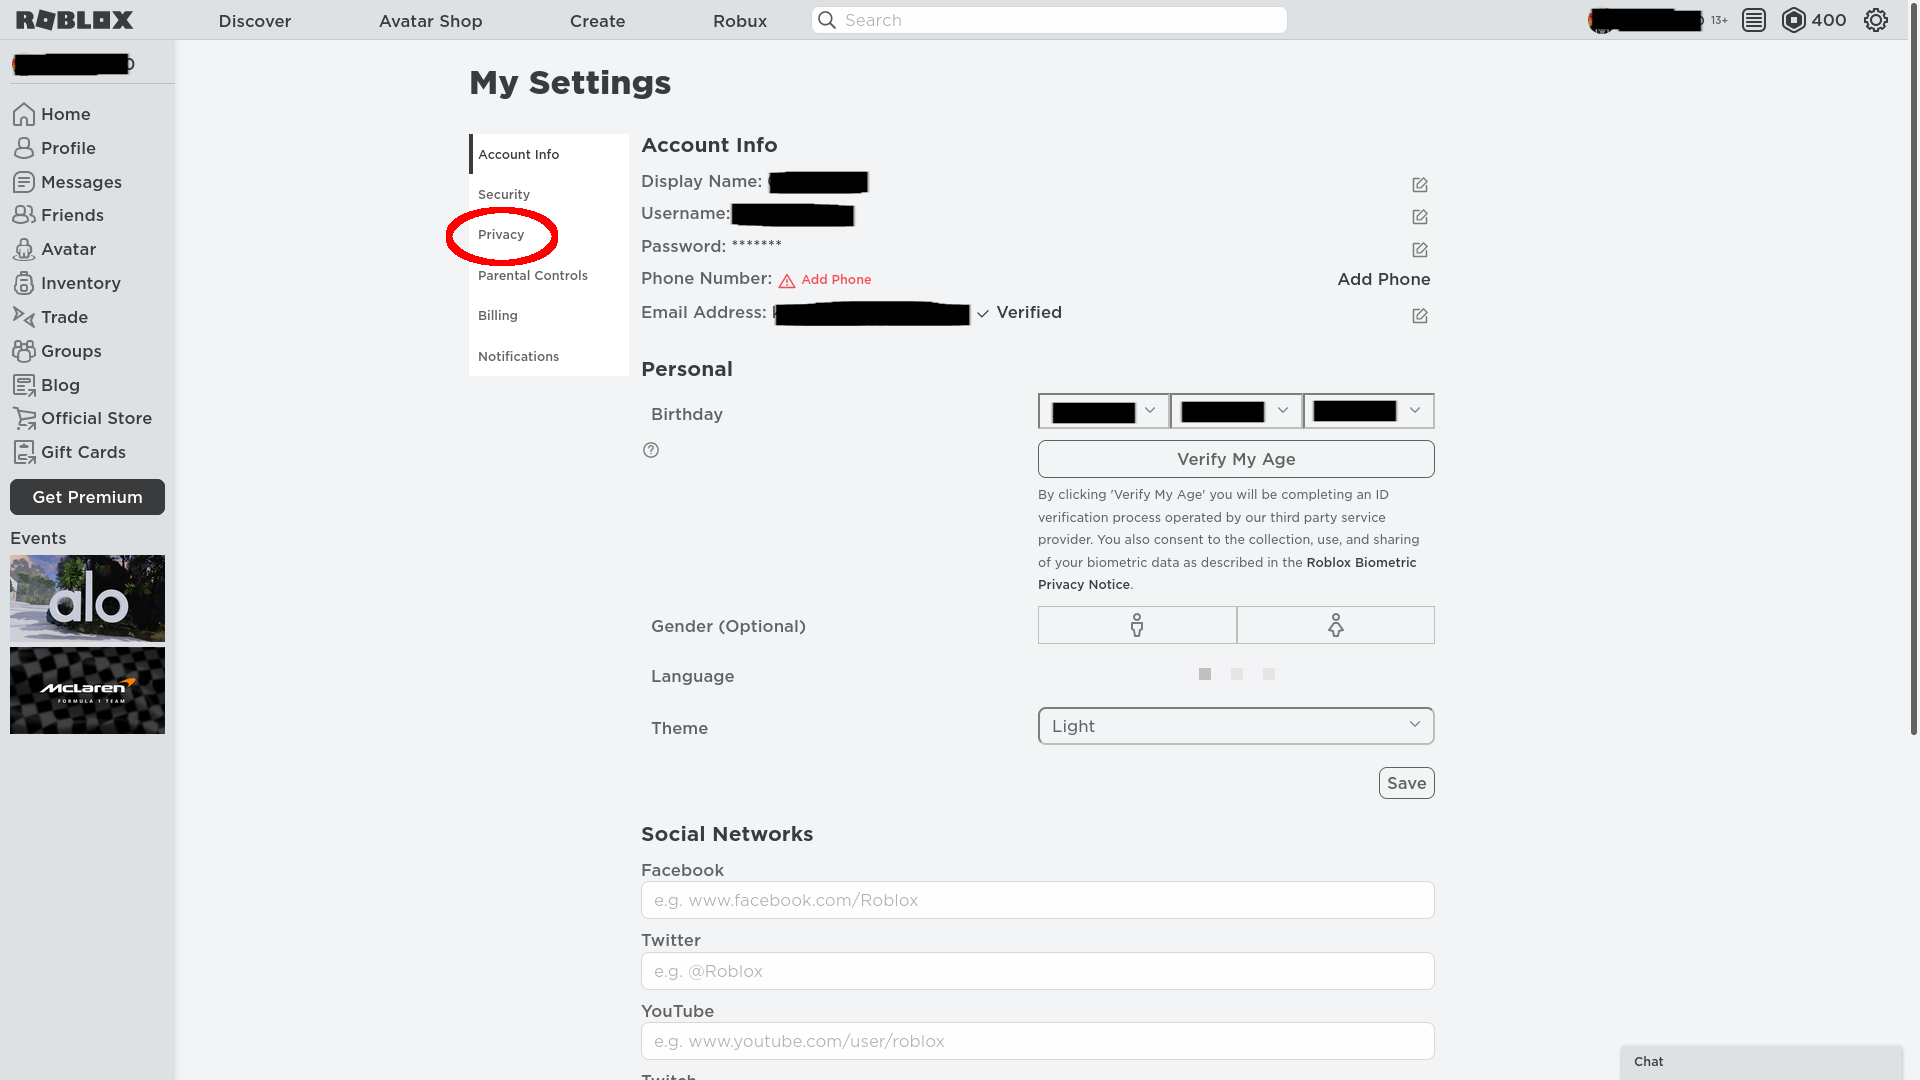 Roblox settings, the Privacy tab is circled